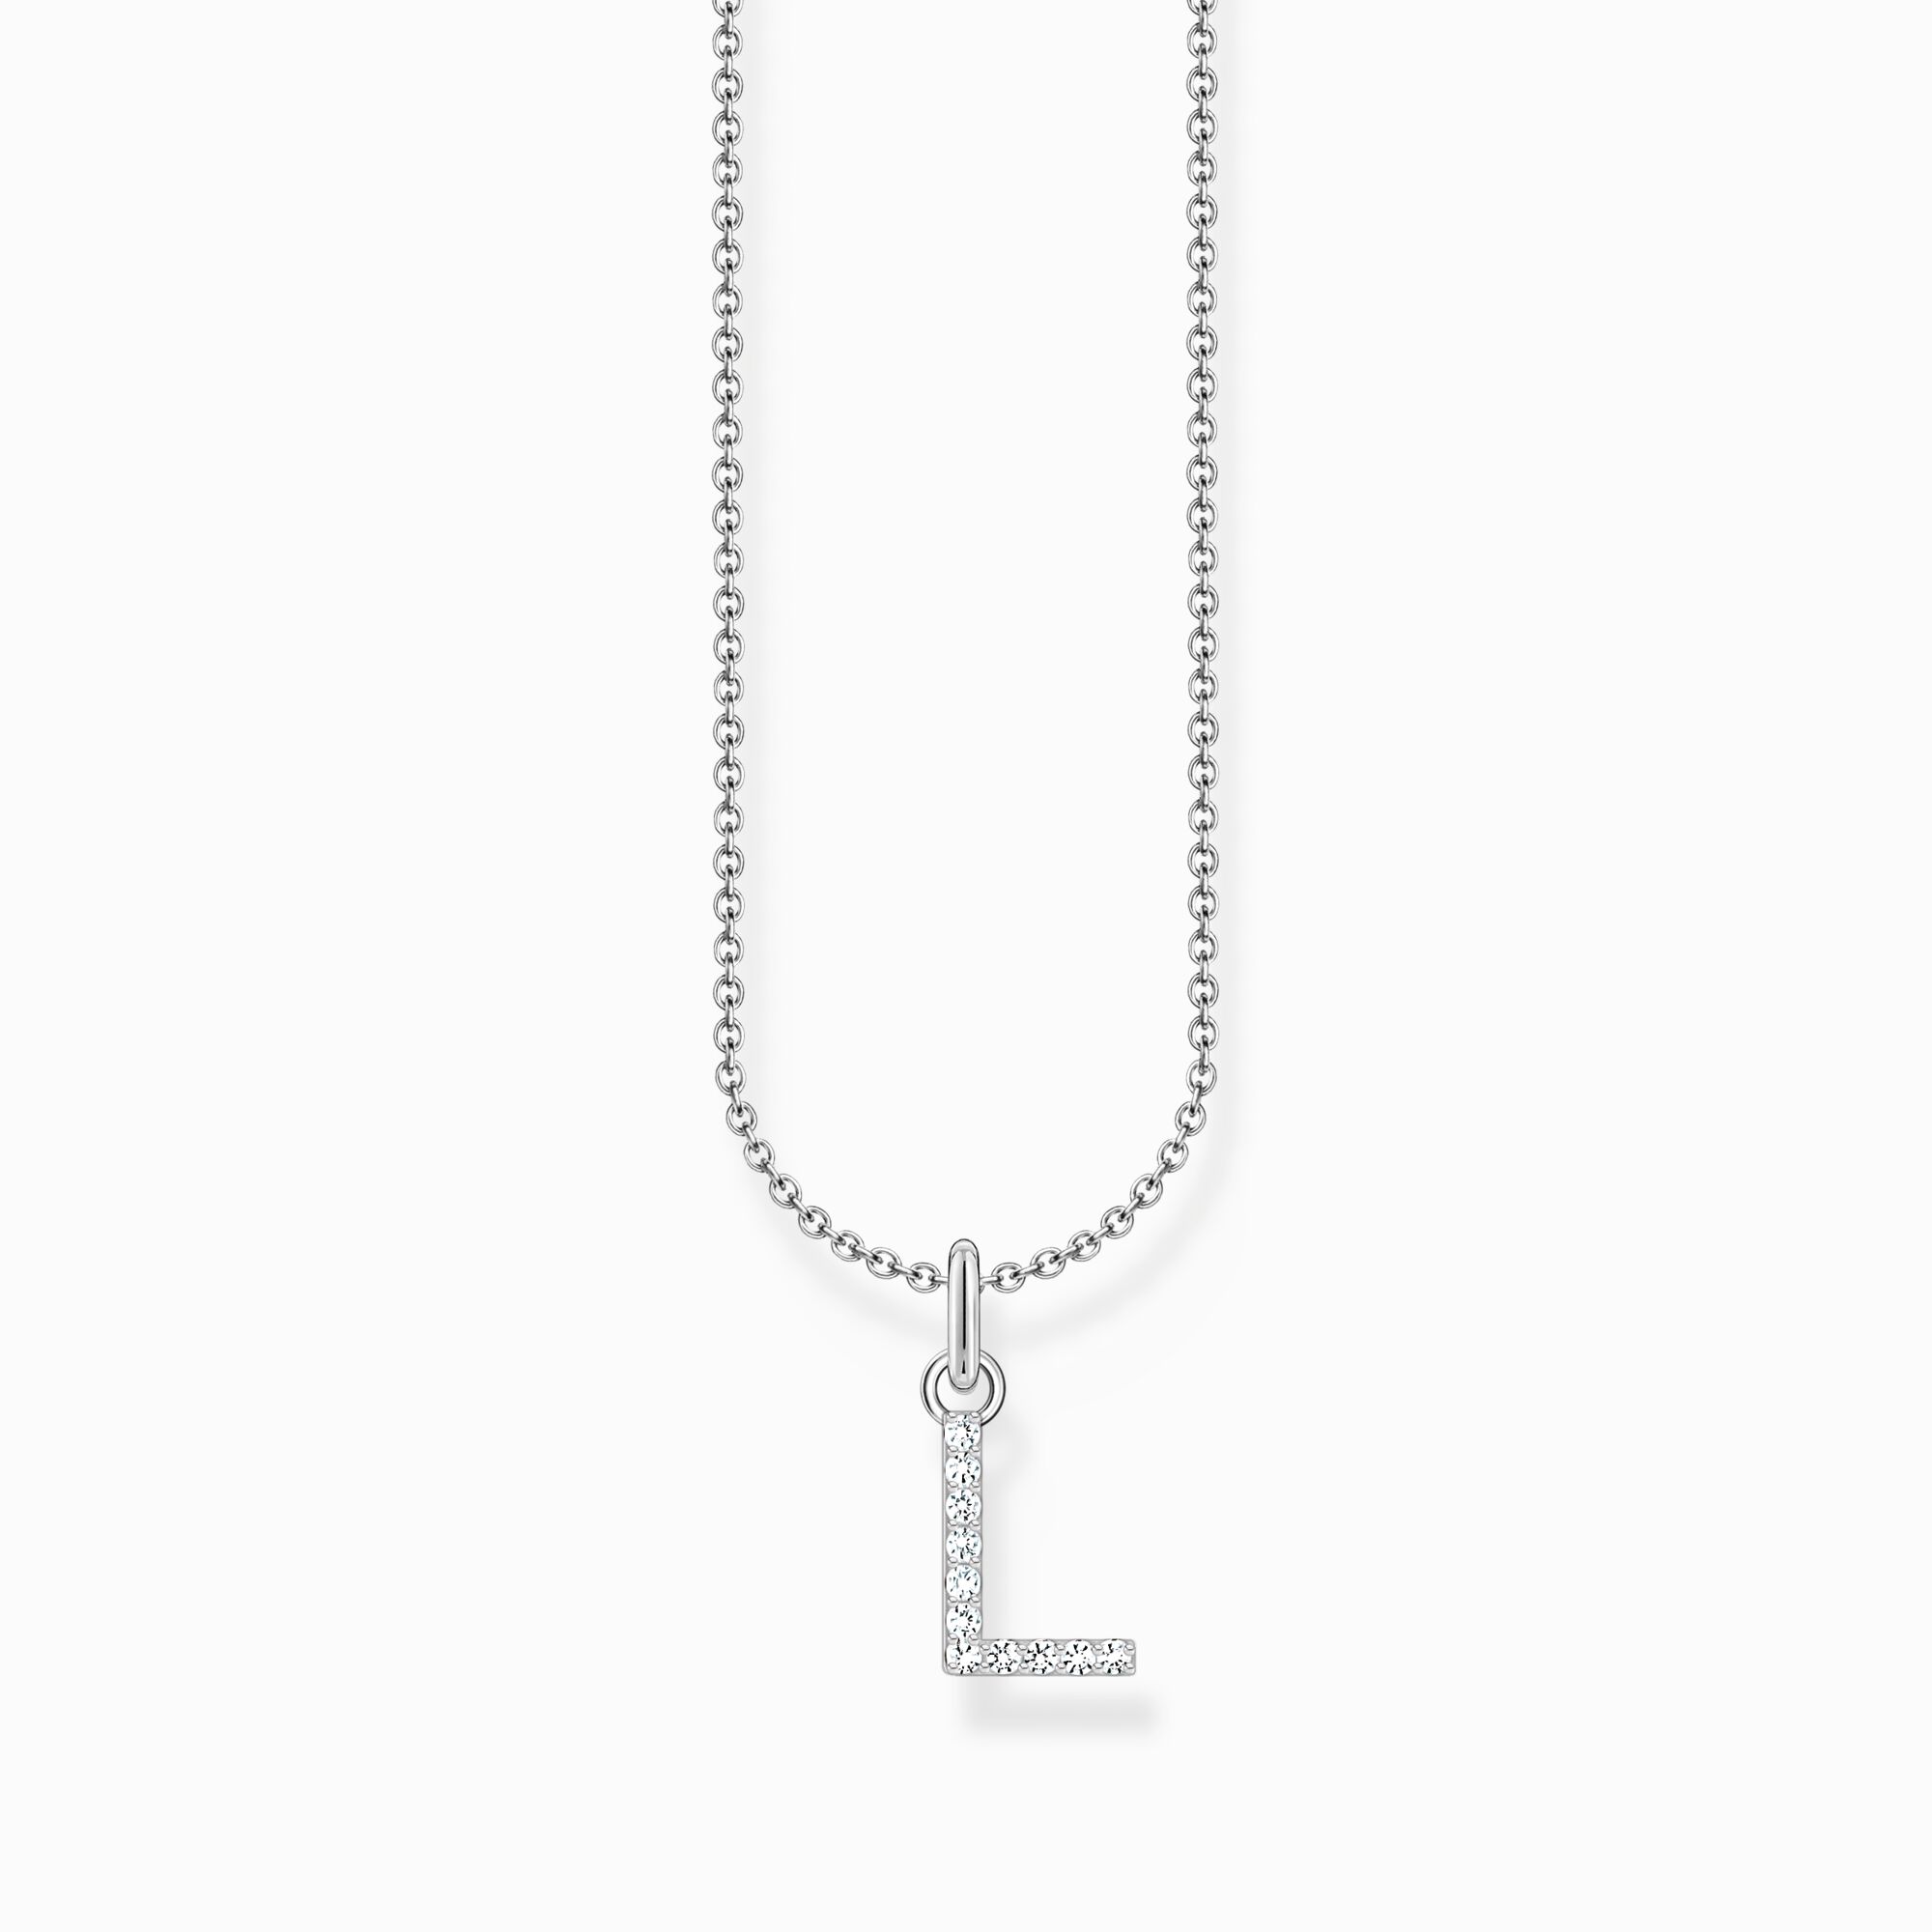 Silver necklace with letter pendant L and white zirconia from the Charming Collection collection in the THOMAS SABO online store